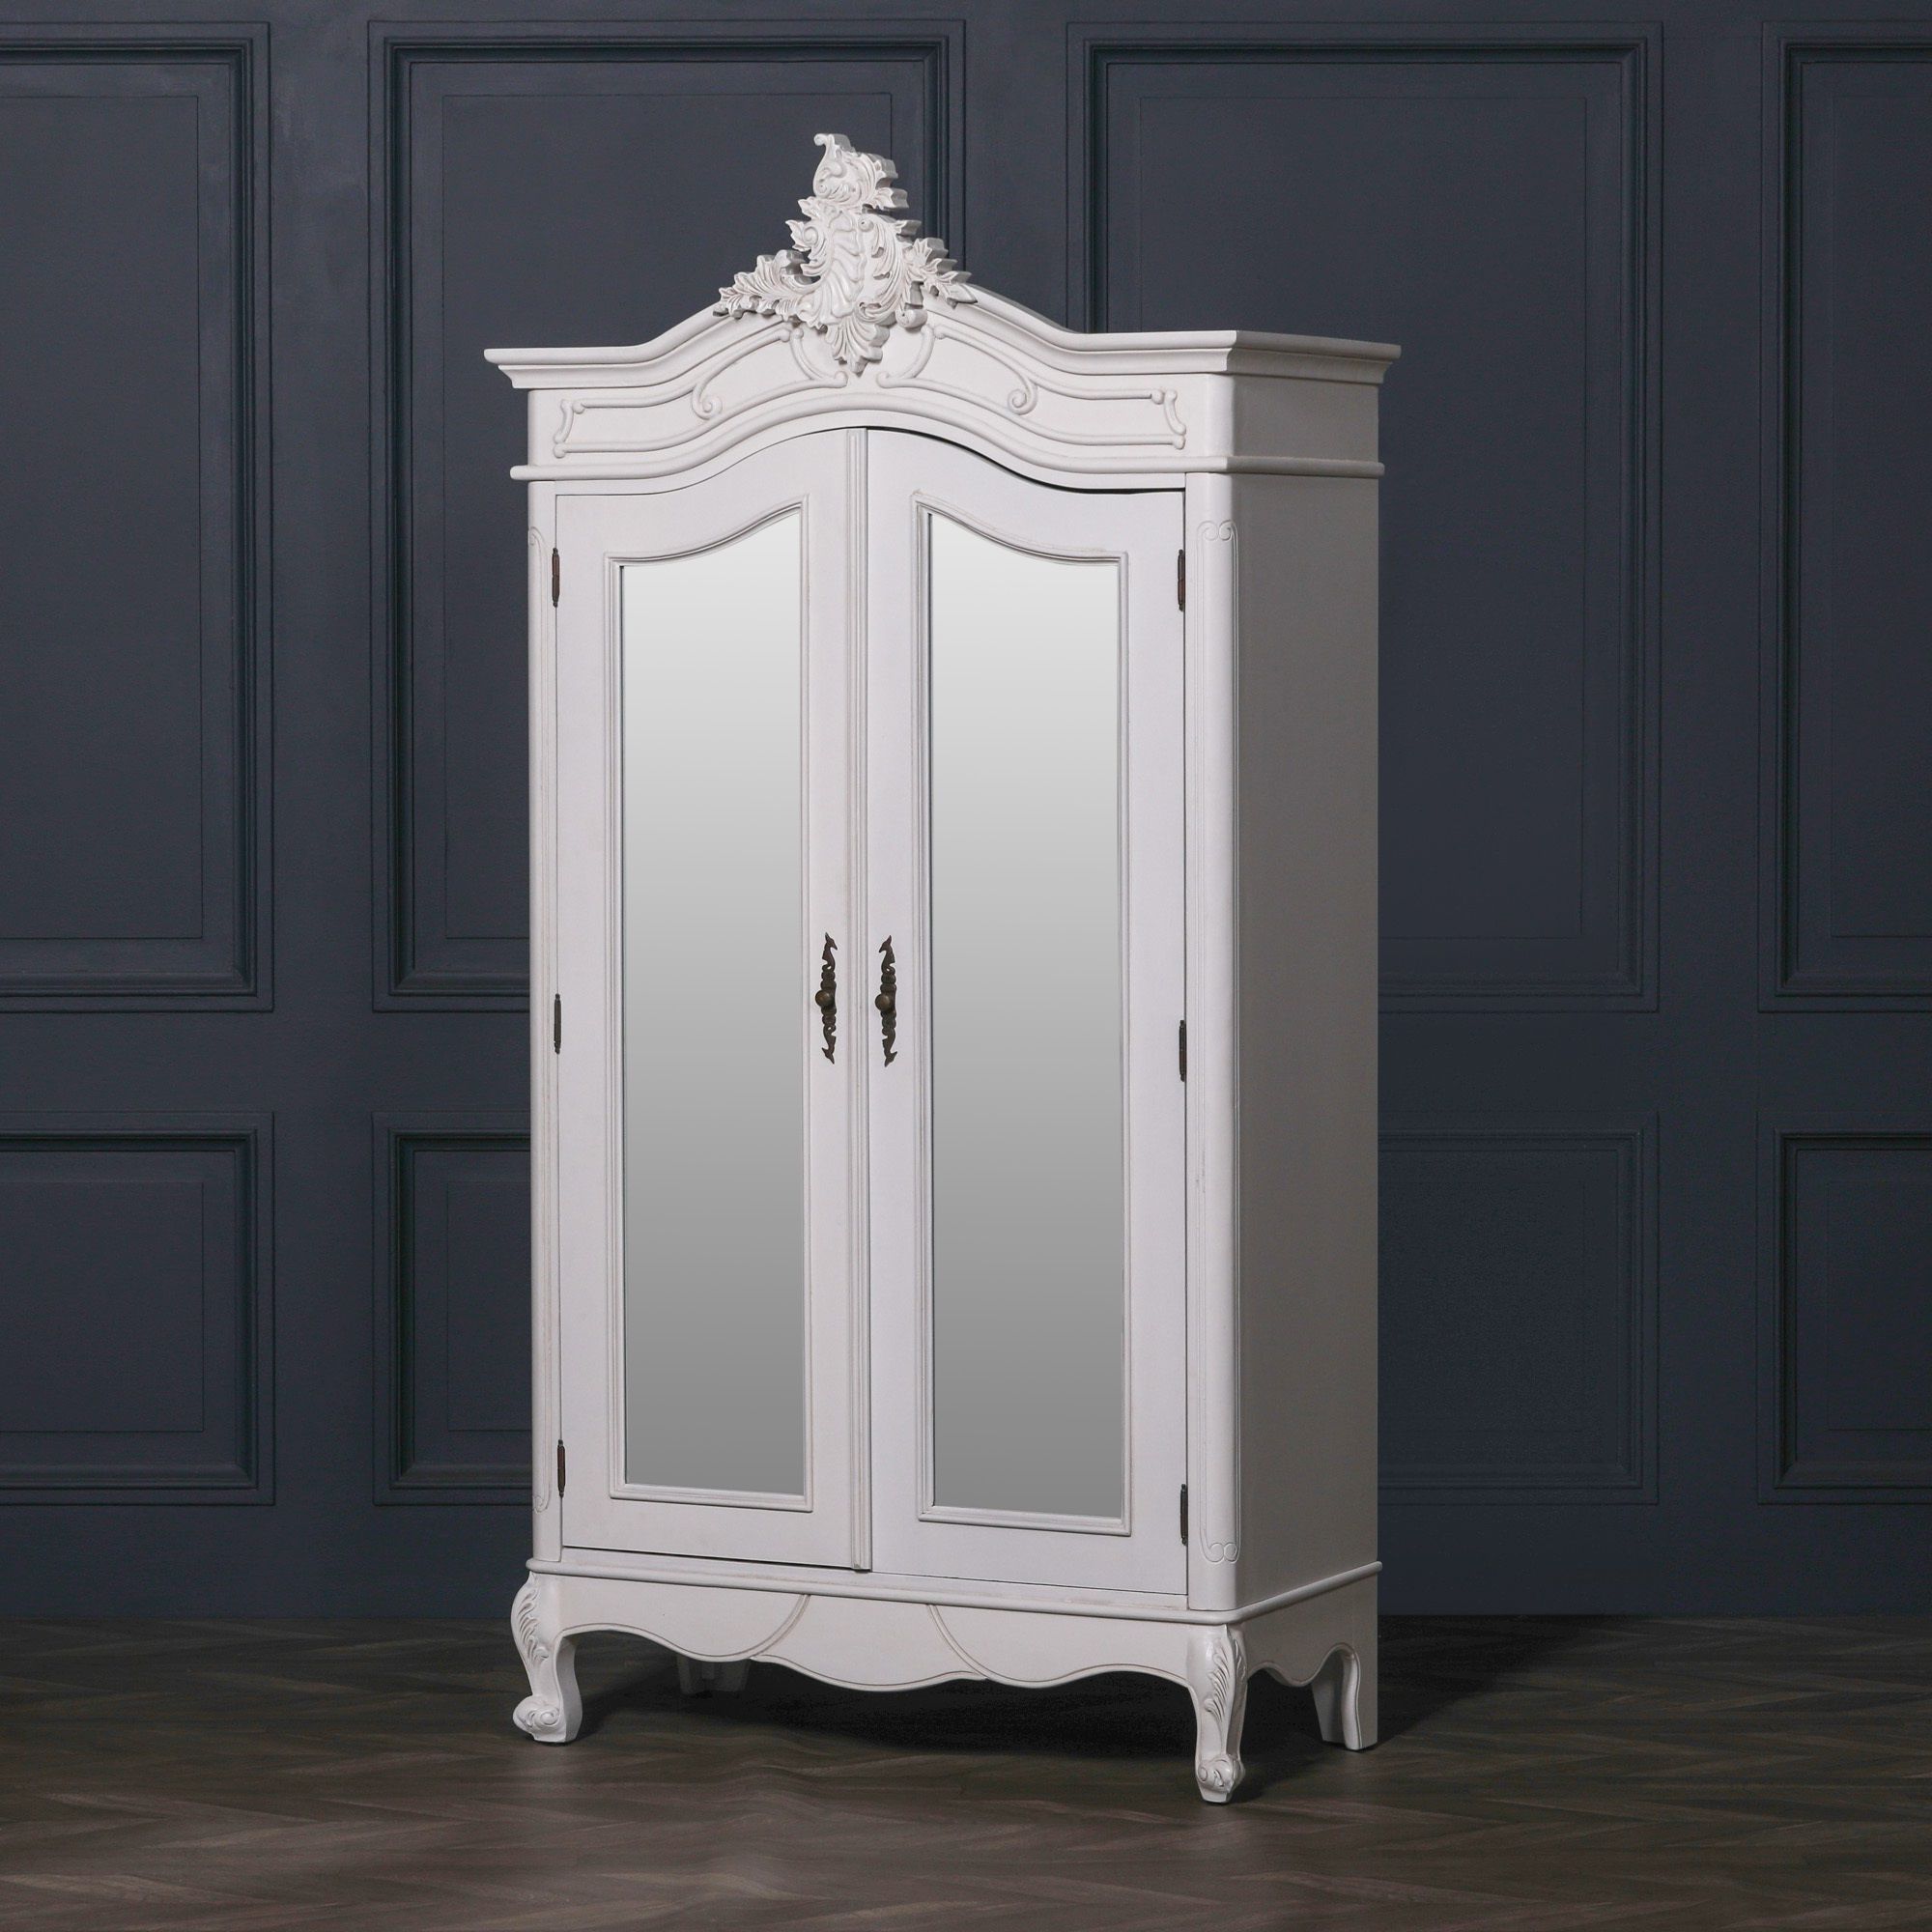 White Double Wardrobe Armoire French Style Mirror Doors Within White Double Wardrobes (Gallery 15 of 20)